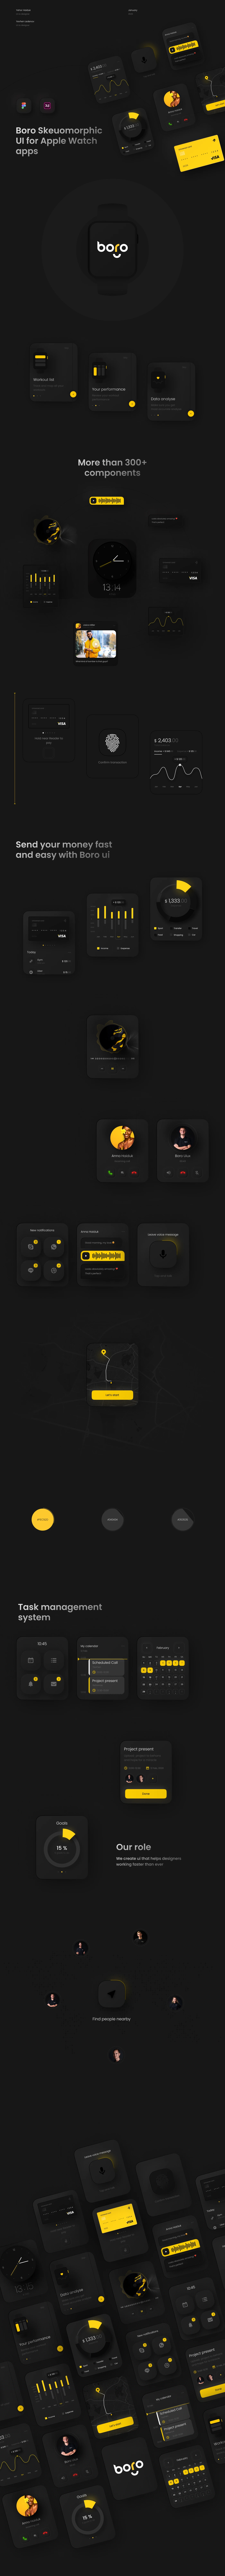 Boro Free UI Kit for Apple Watch Apps